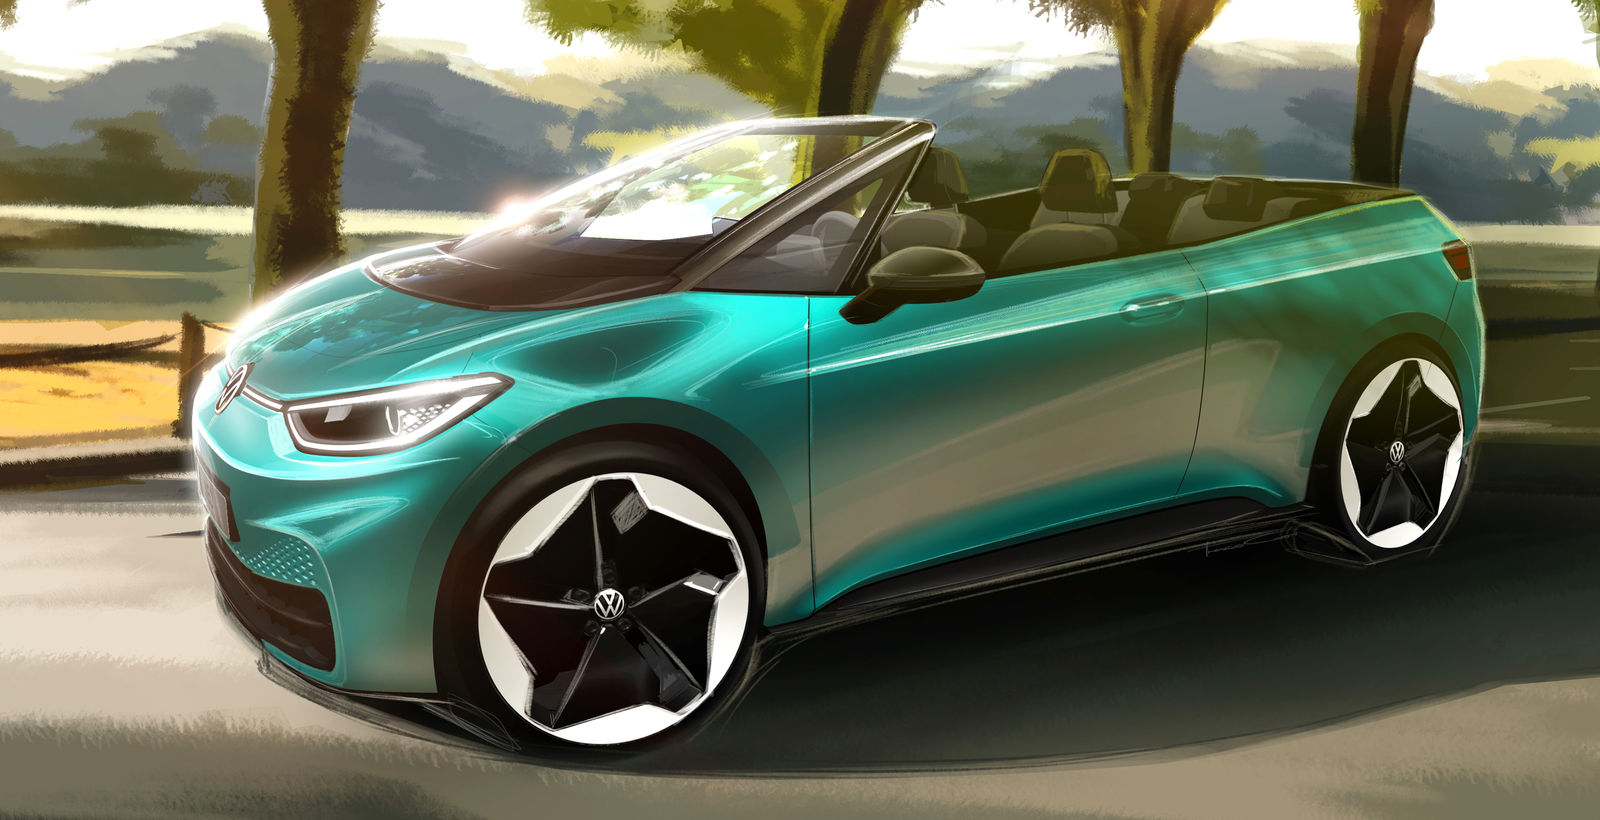 EV convertible? What is your opinion?